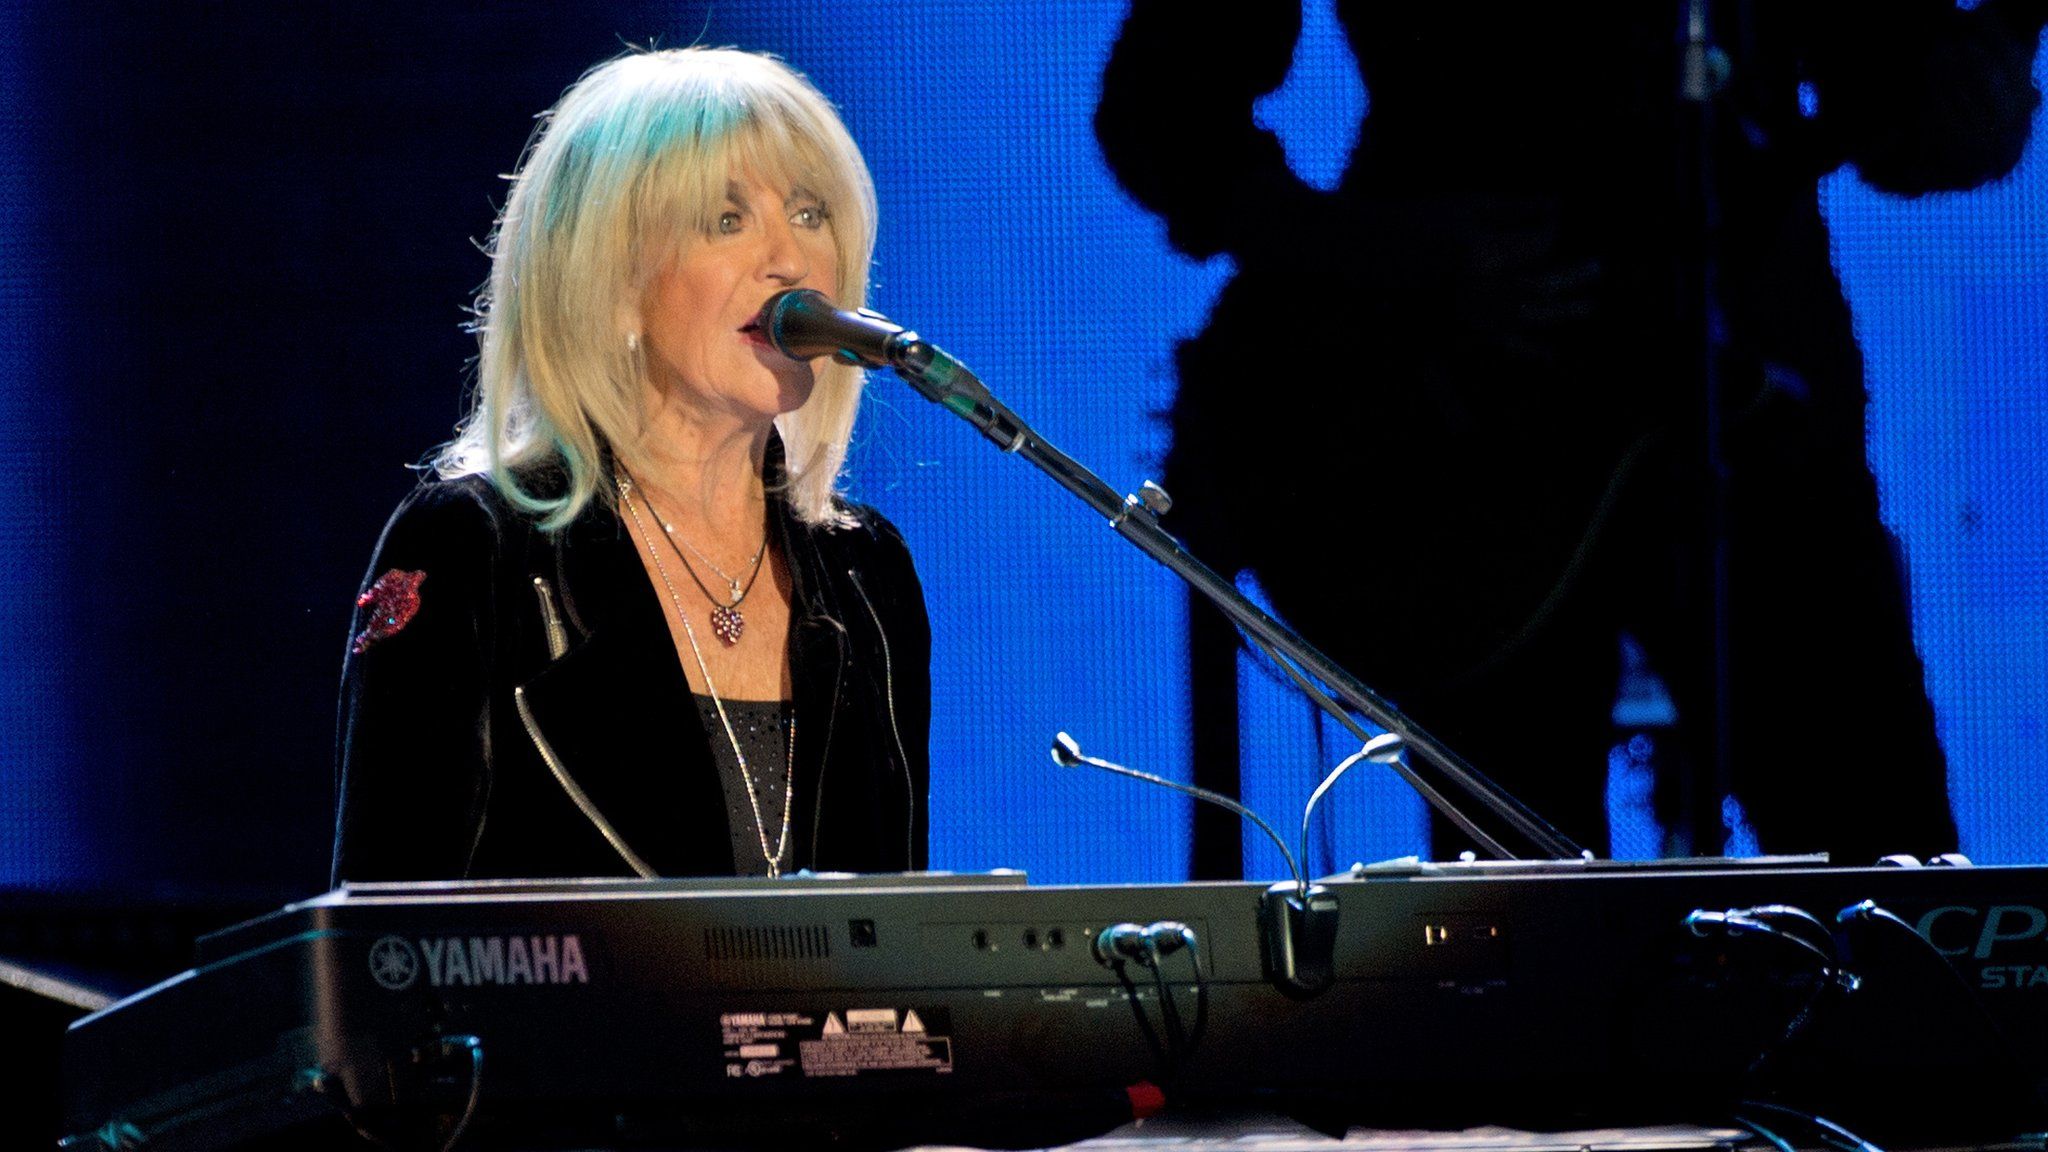 Christine McVie performs at the O2 Arena in London